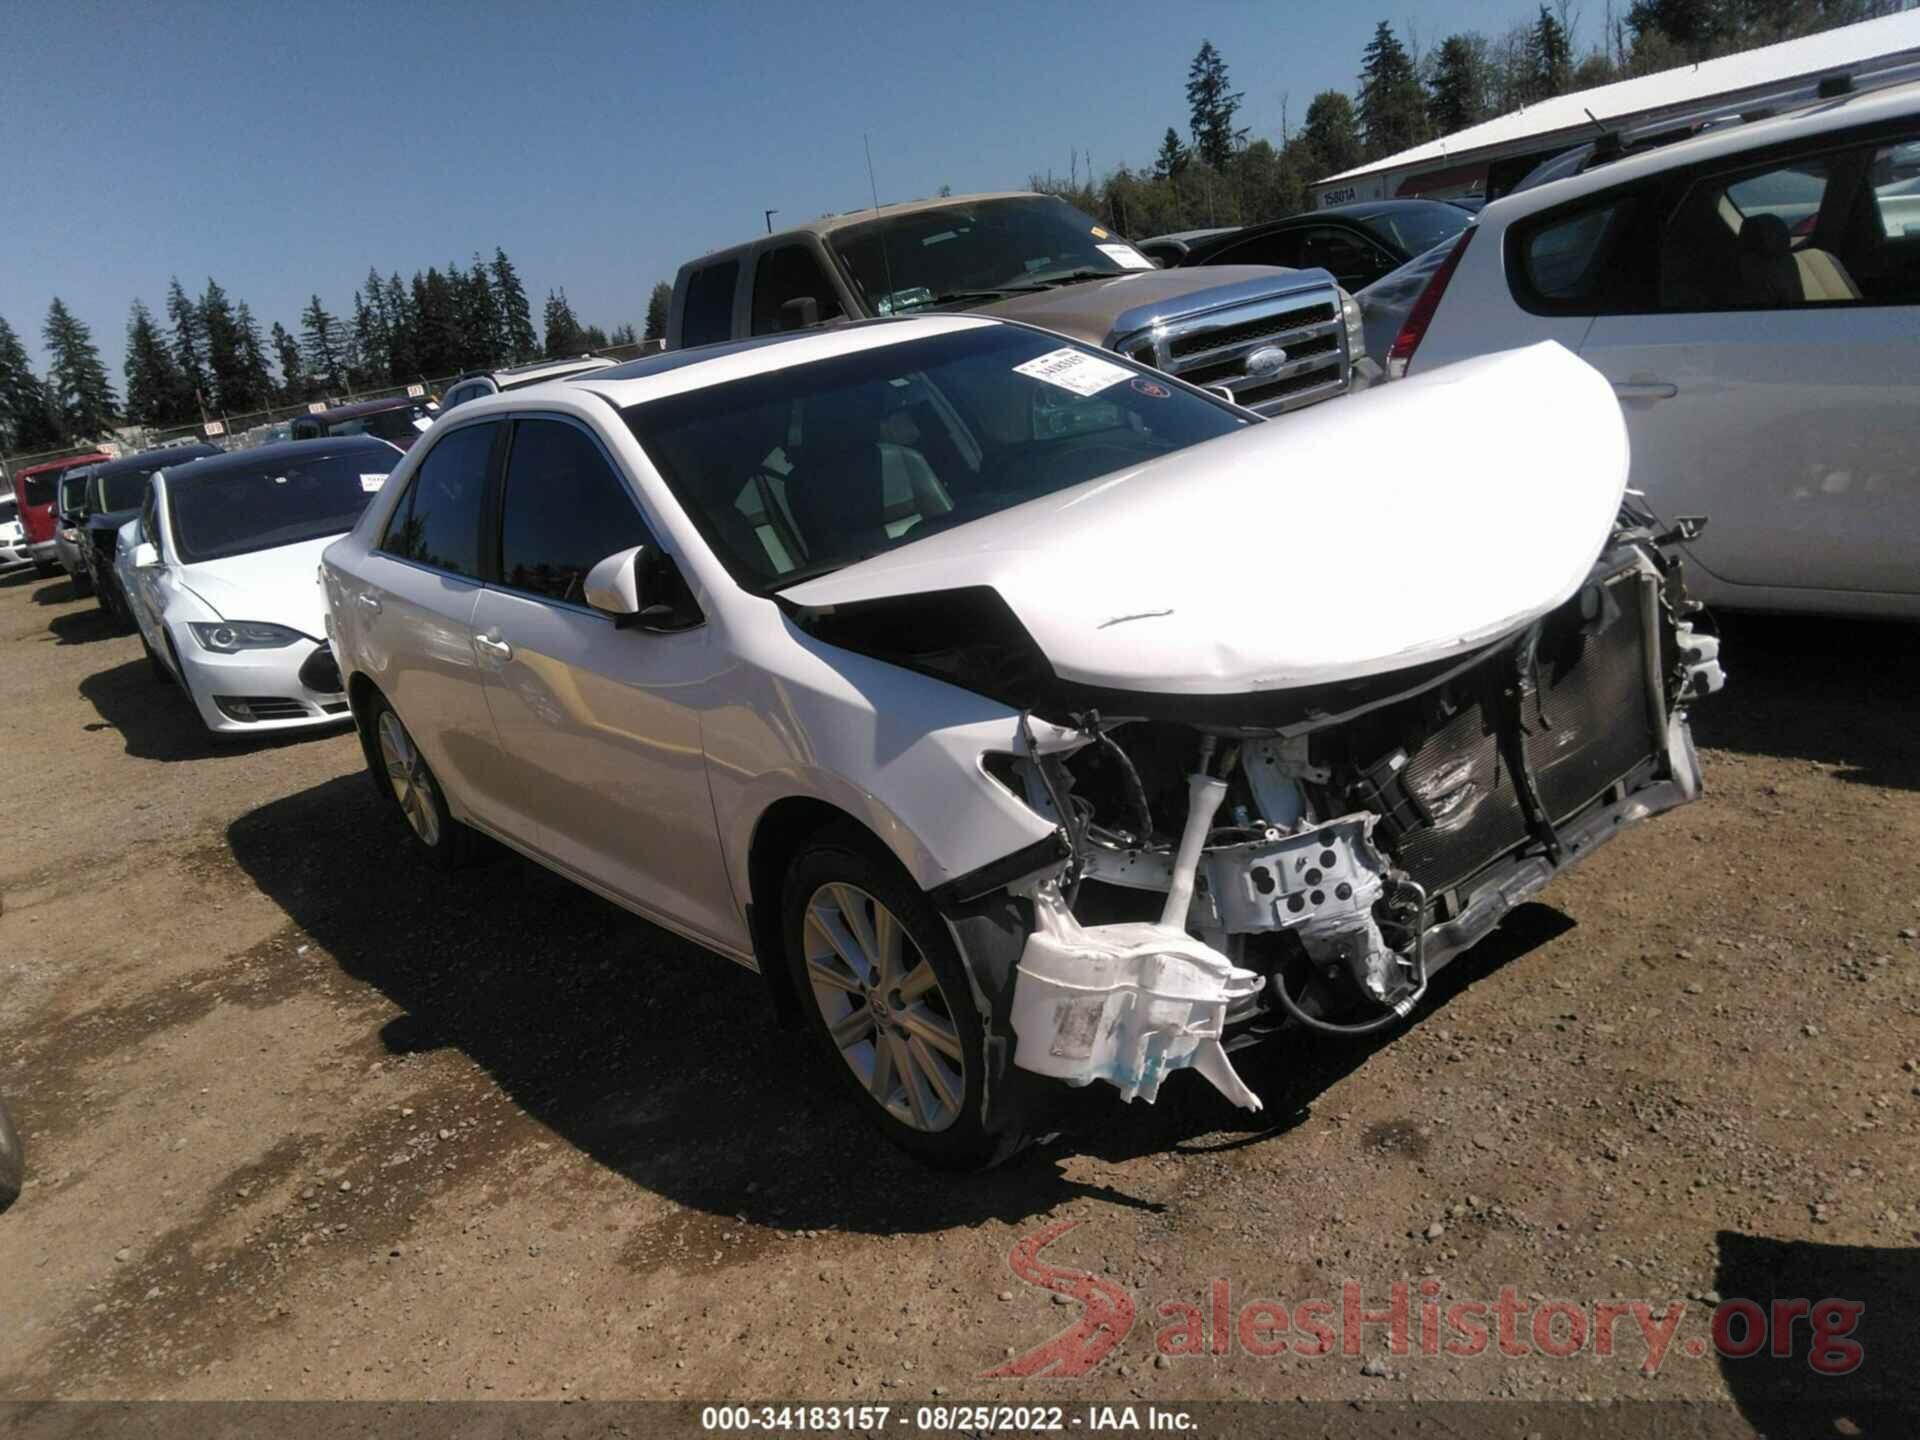 4T4BF1FK4DR293424 2013 TOYOTA CAMRY